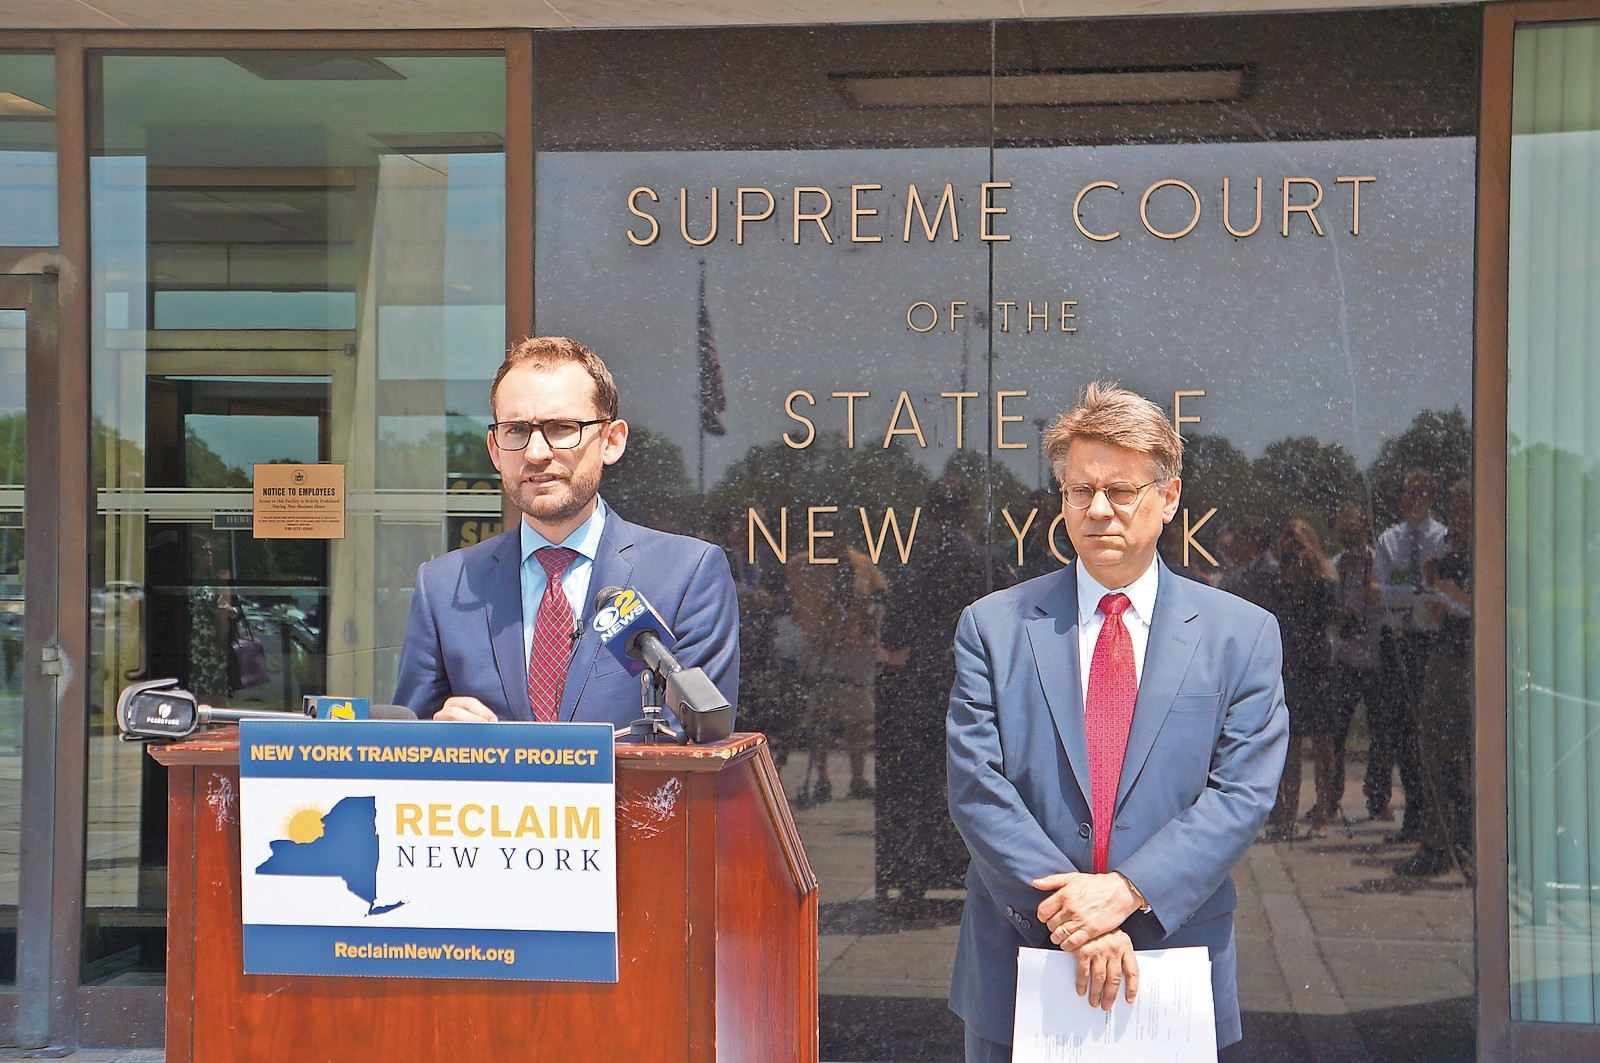 Reclaim New York Executive Director Brandon Muir, left, and attorney Dennis J. Saffran discussed the New York Transparency Project on Tuesday in Mineola.